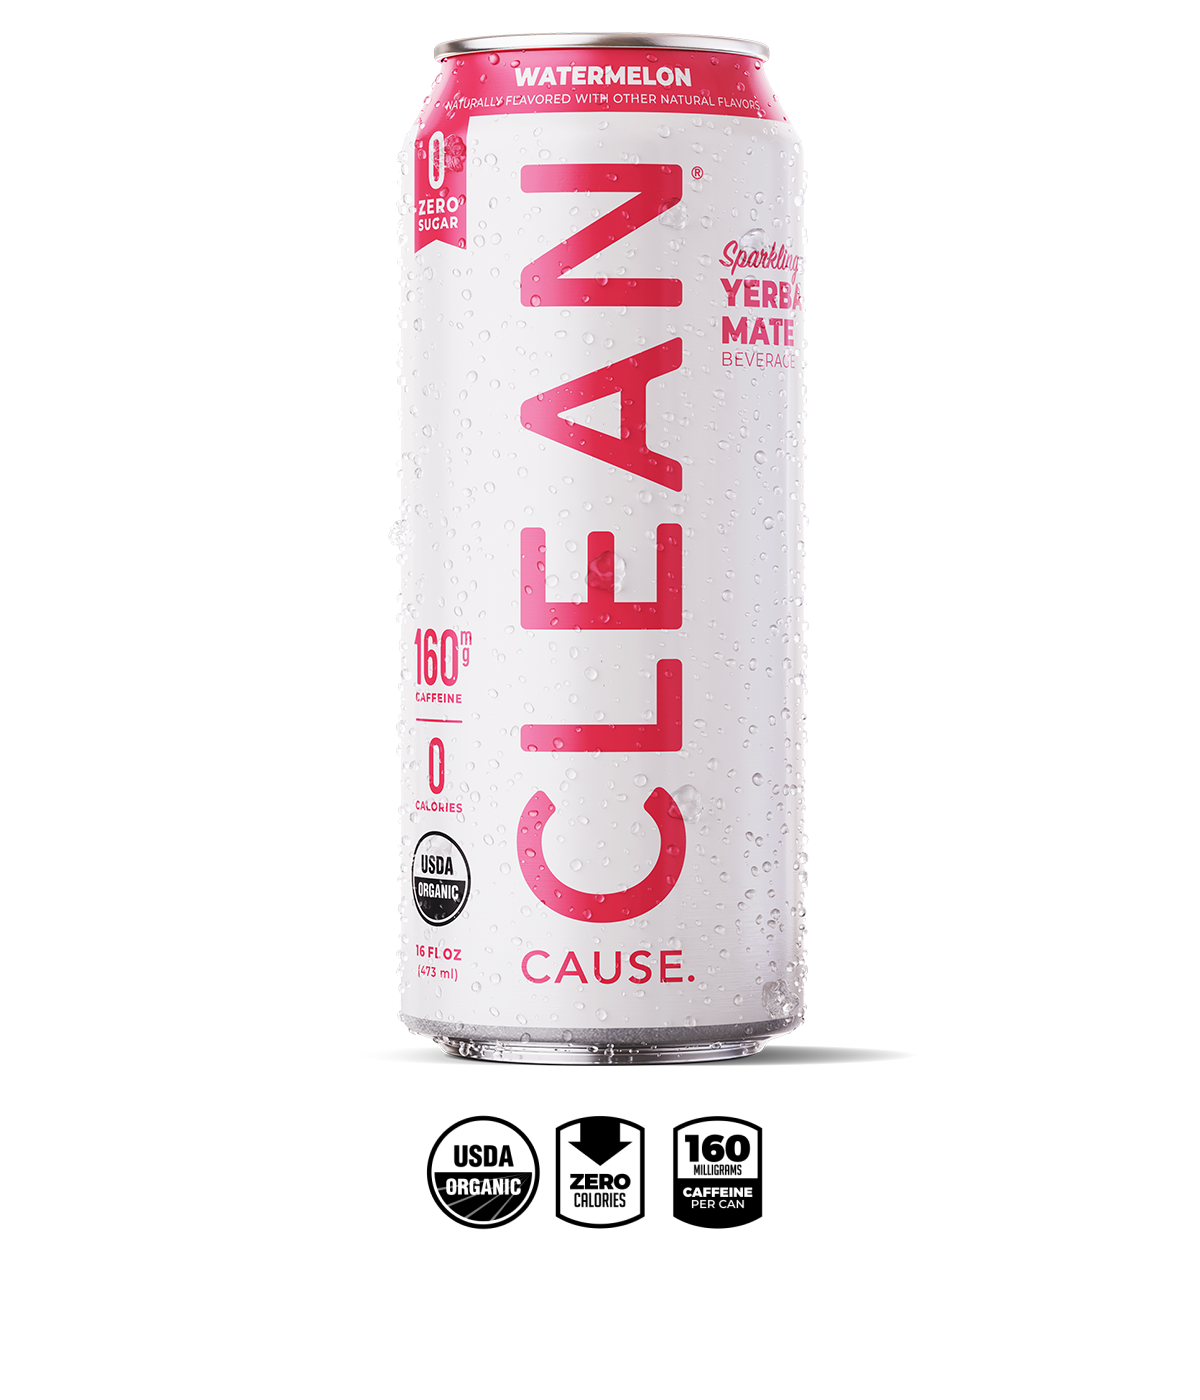 A can of Watermelon Zero Sugar CLEAN on a white background with the highlighted features below it. The highlighted features are USDA organic, zero calories, 160mg caffeine per can.